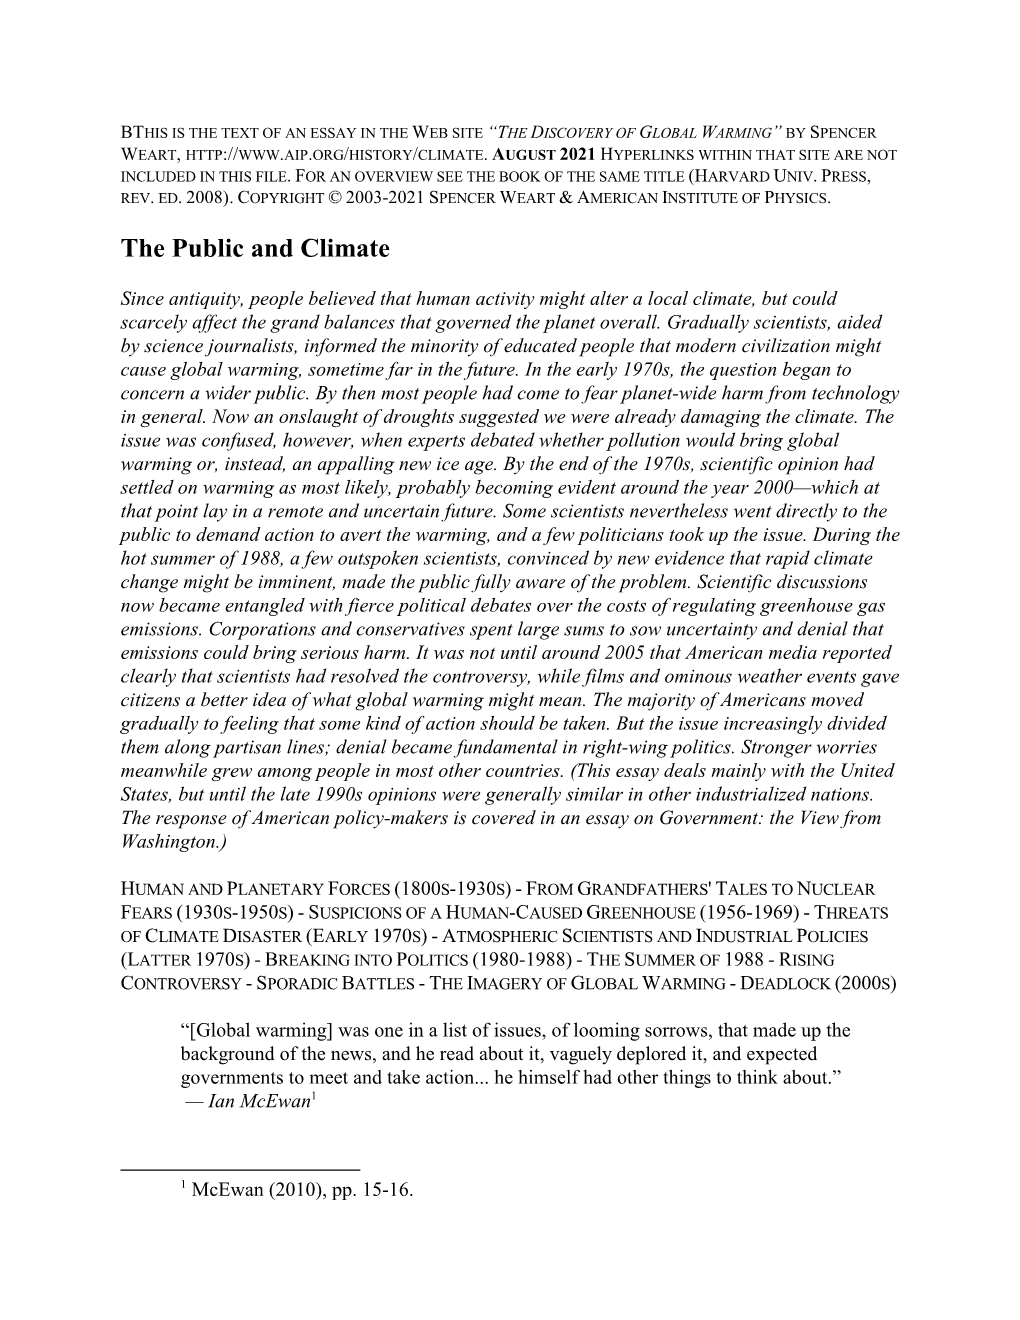 The Public and Climate